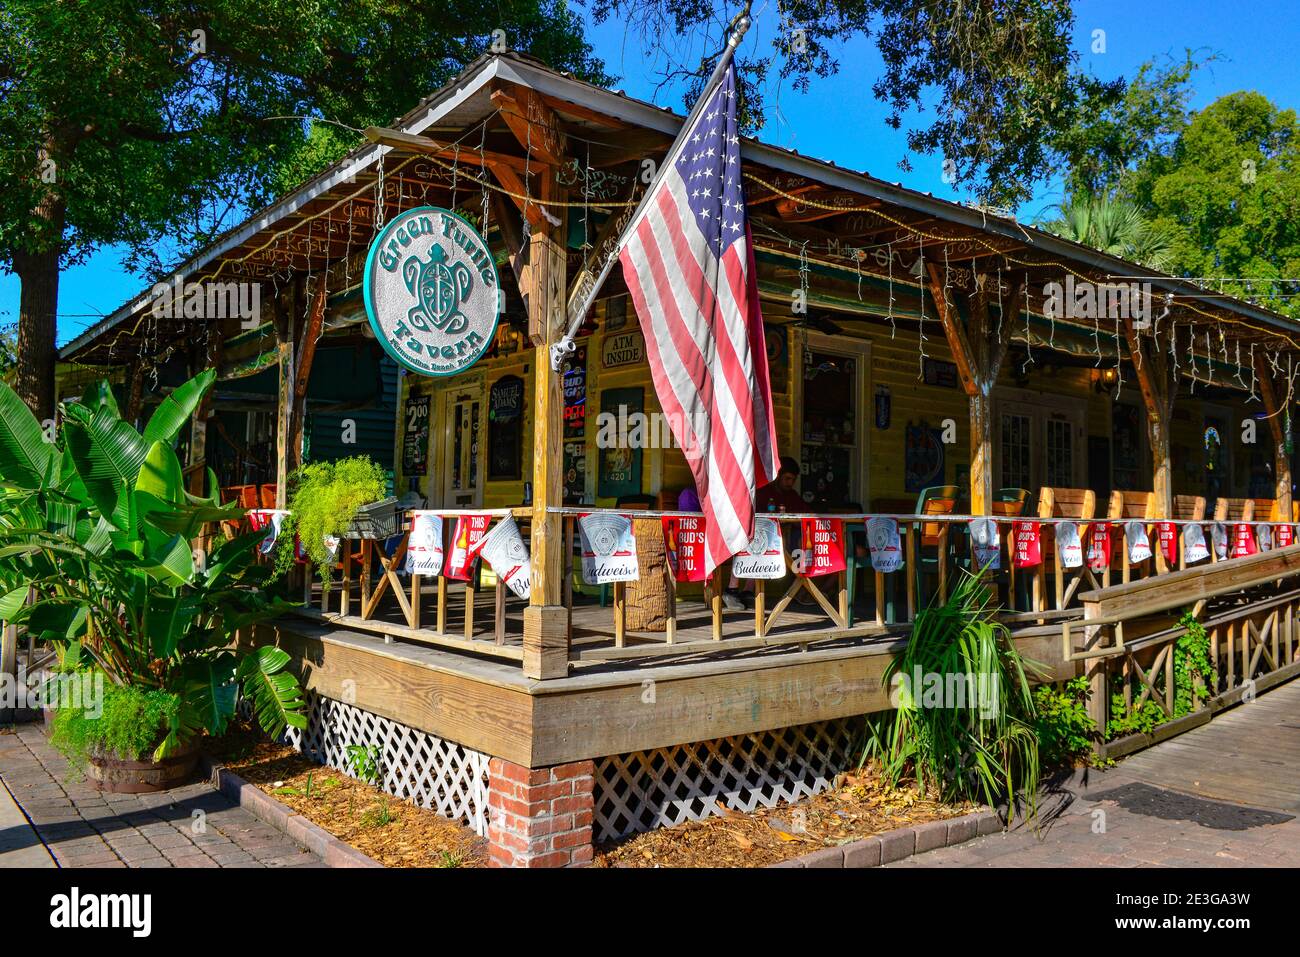 The Green Turtle Tavern with signage, beer banners and outdoor eating and drinking is a popular bar and music venue in small town Fernandina Beach, FL Stock Photo